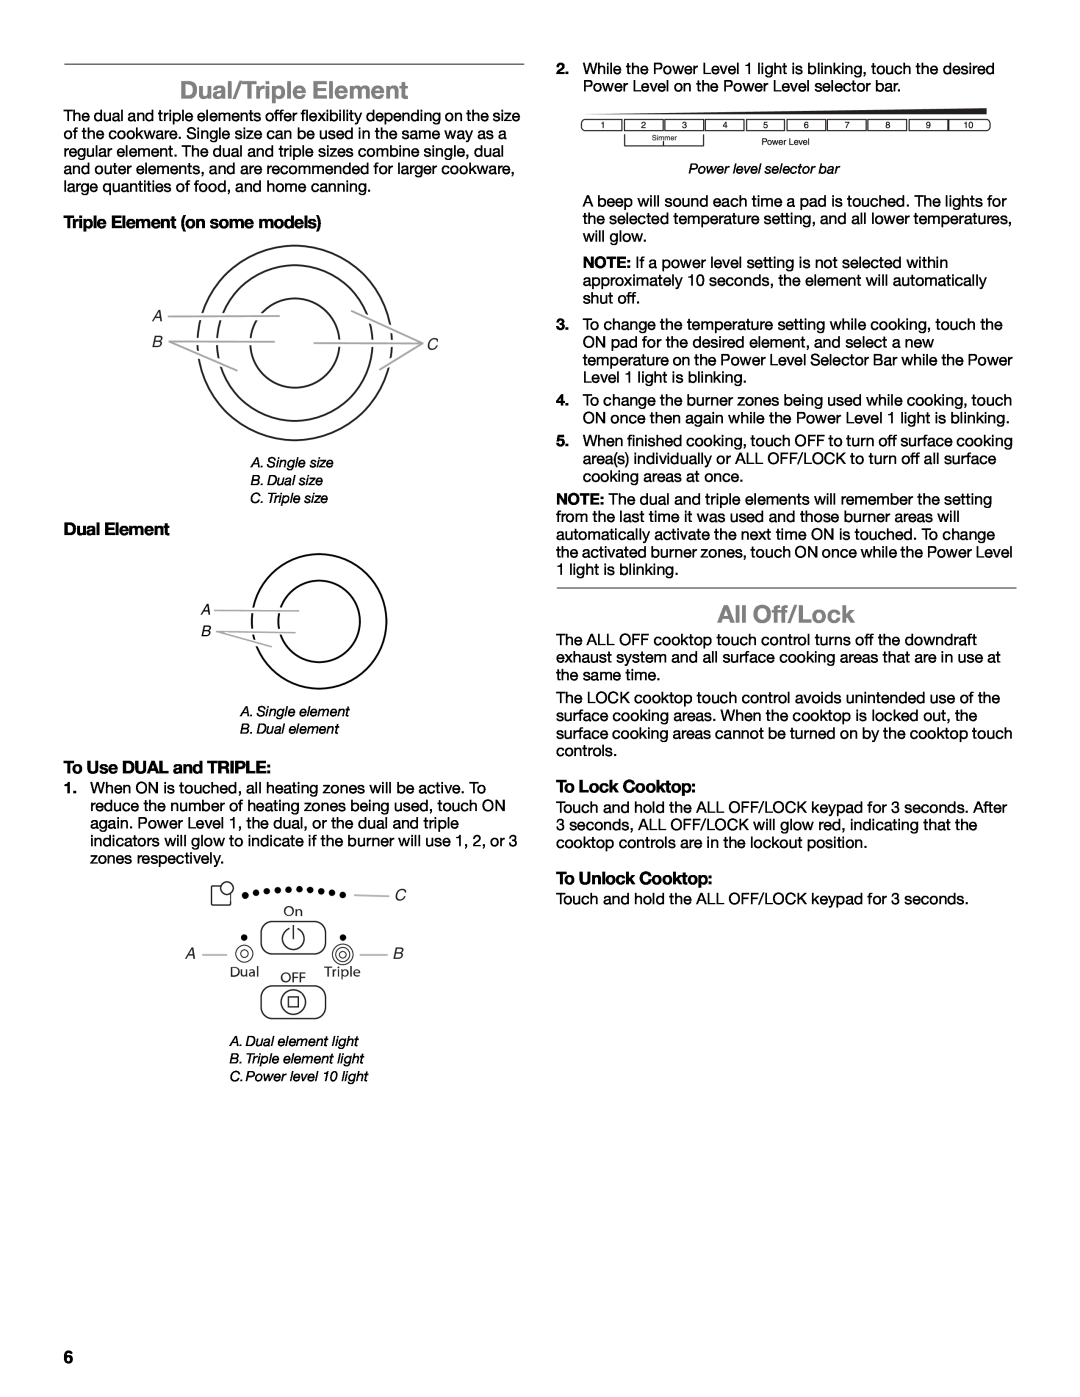 Whirlpool G7CE3034XC manual Dual/Triple Element, All Off/Lock, Triple Element on some models, Dual Element, To Lock Cooktop 